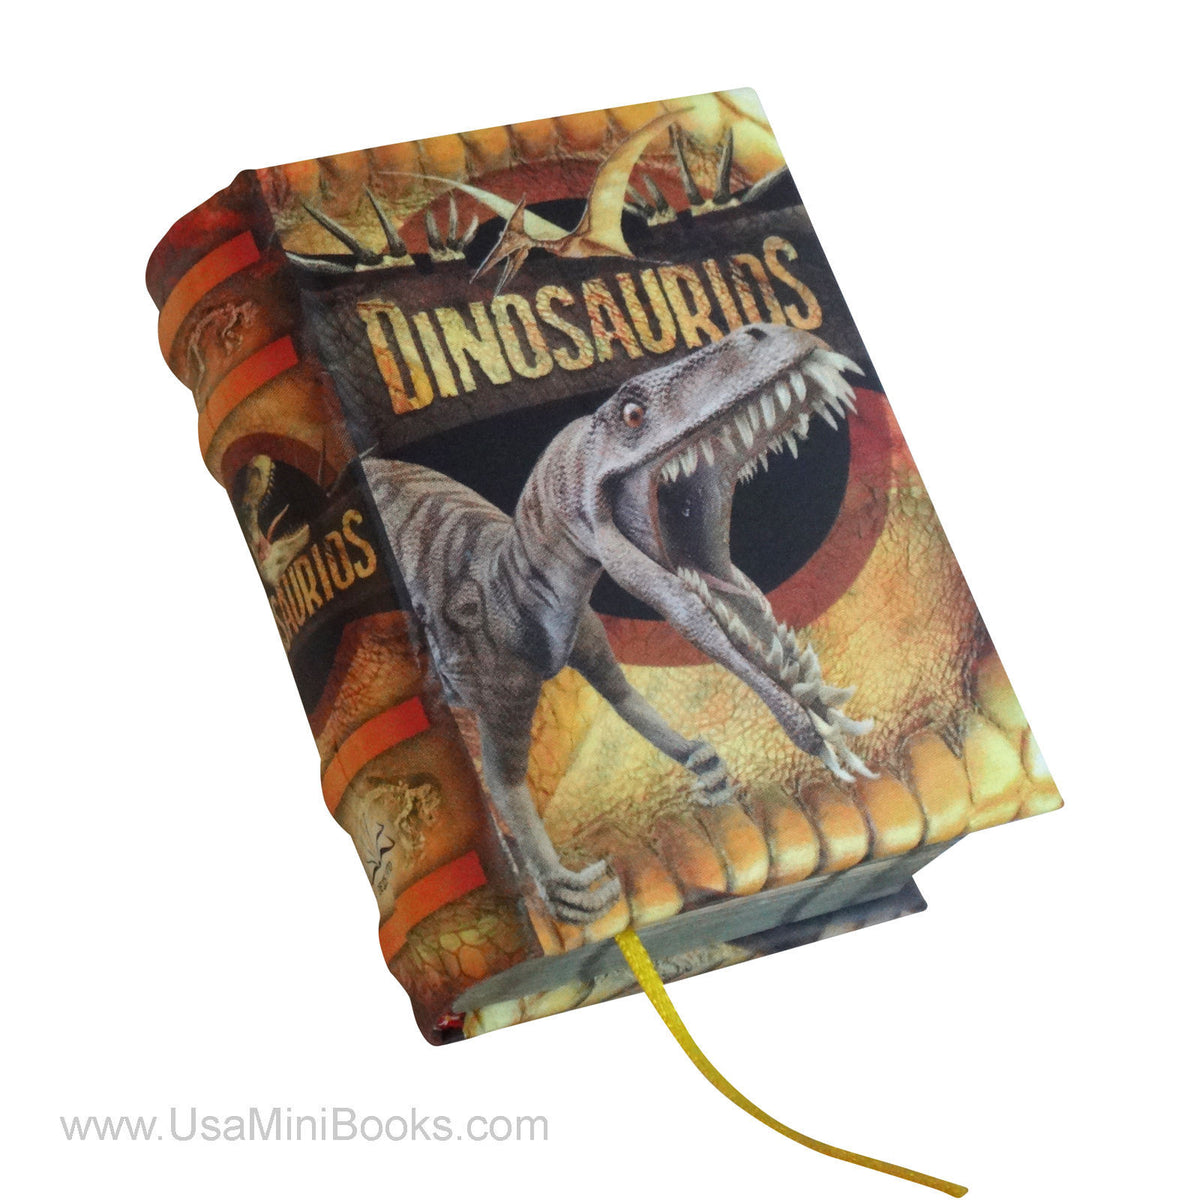 New Dinosaurios in spanish Legible Miniature Book hardcover with illustrations - Teacher In Spanish